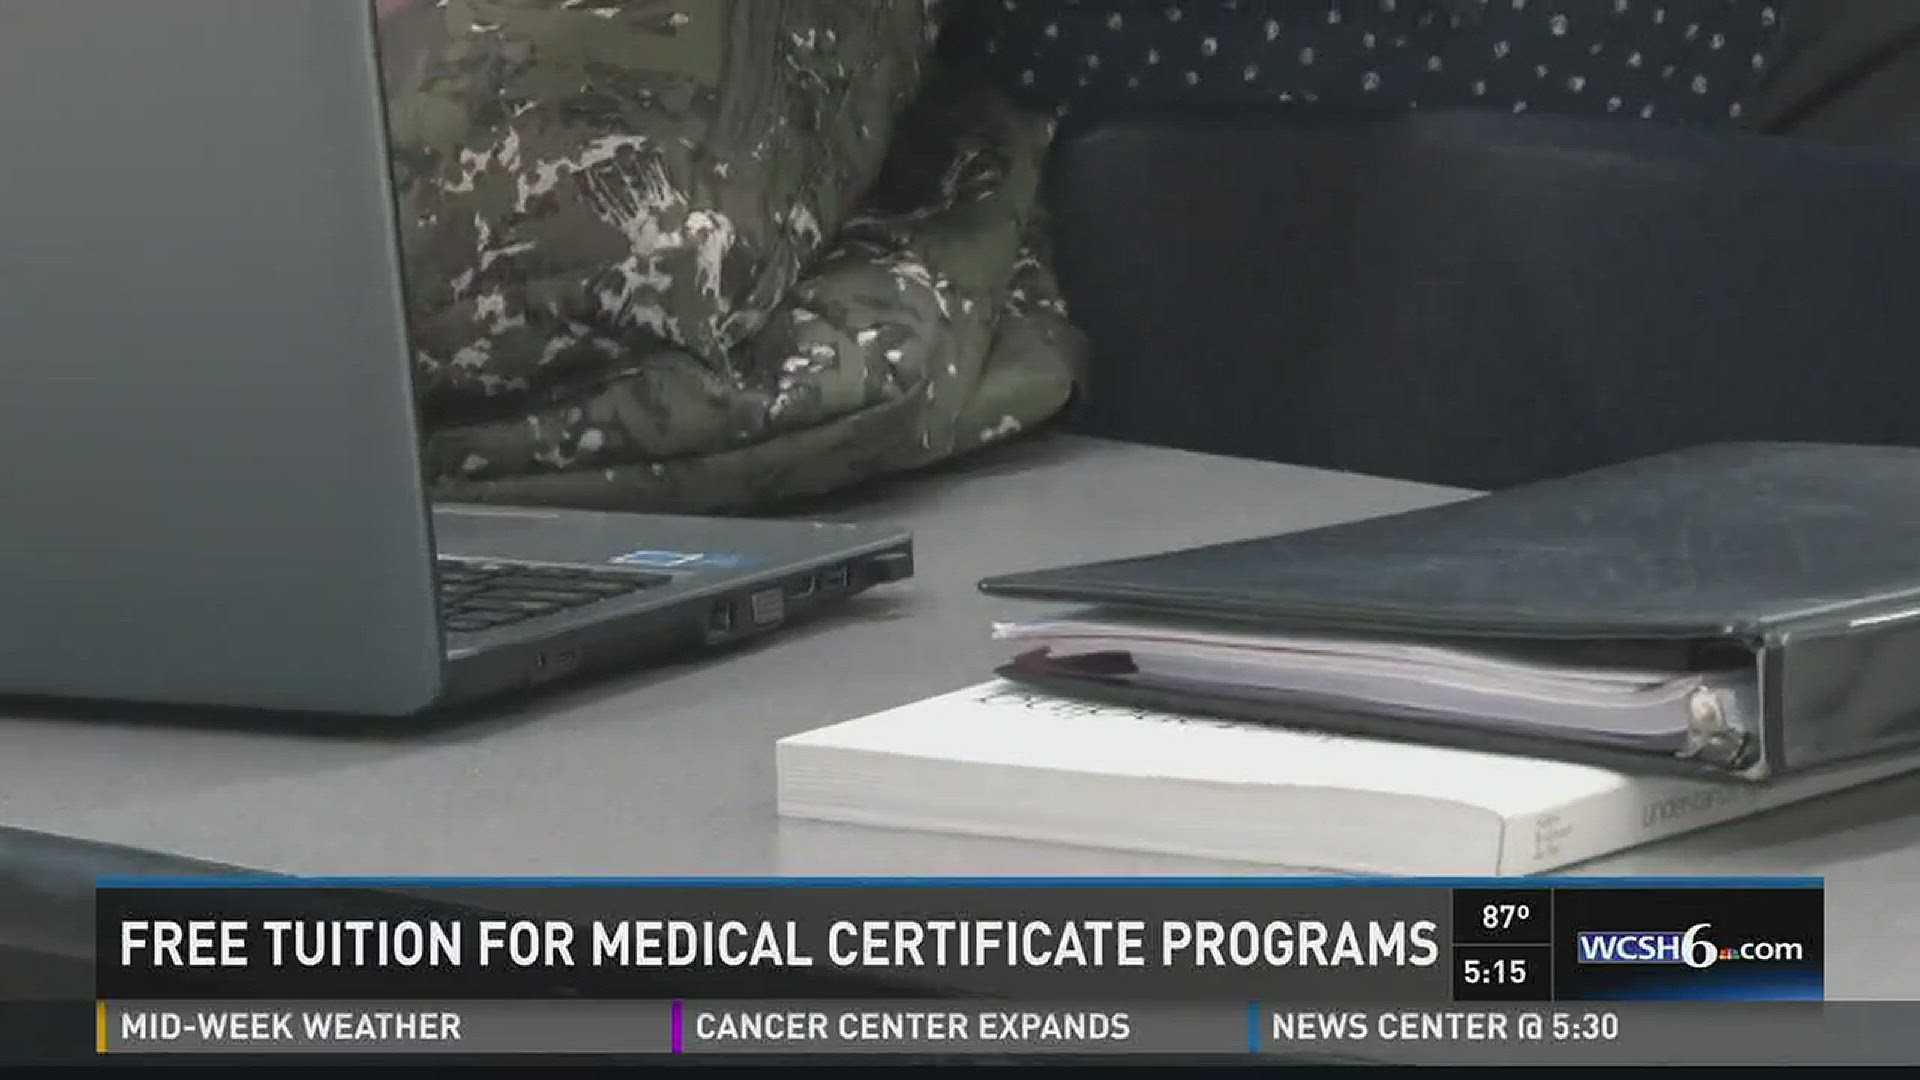 Free tuition for medical certificate programs